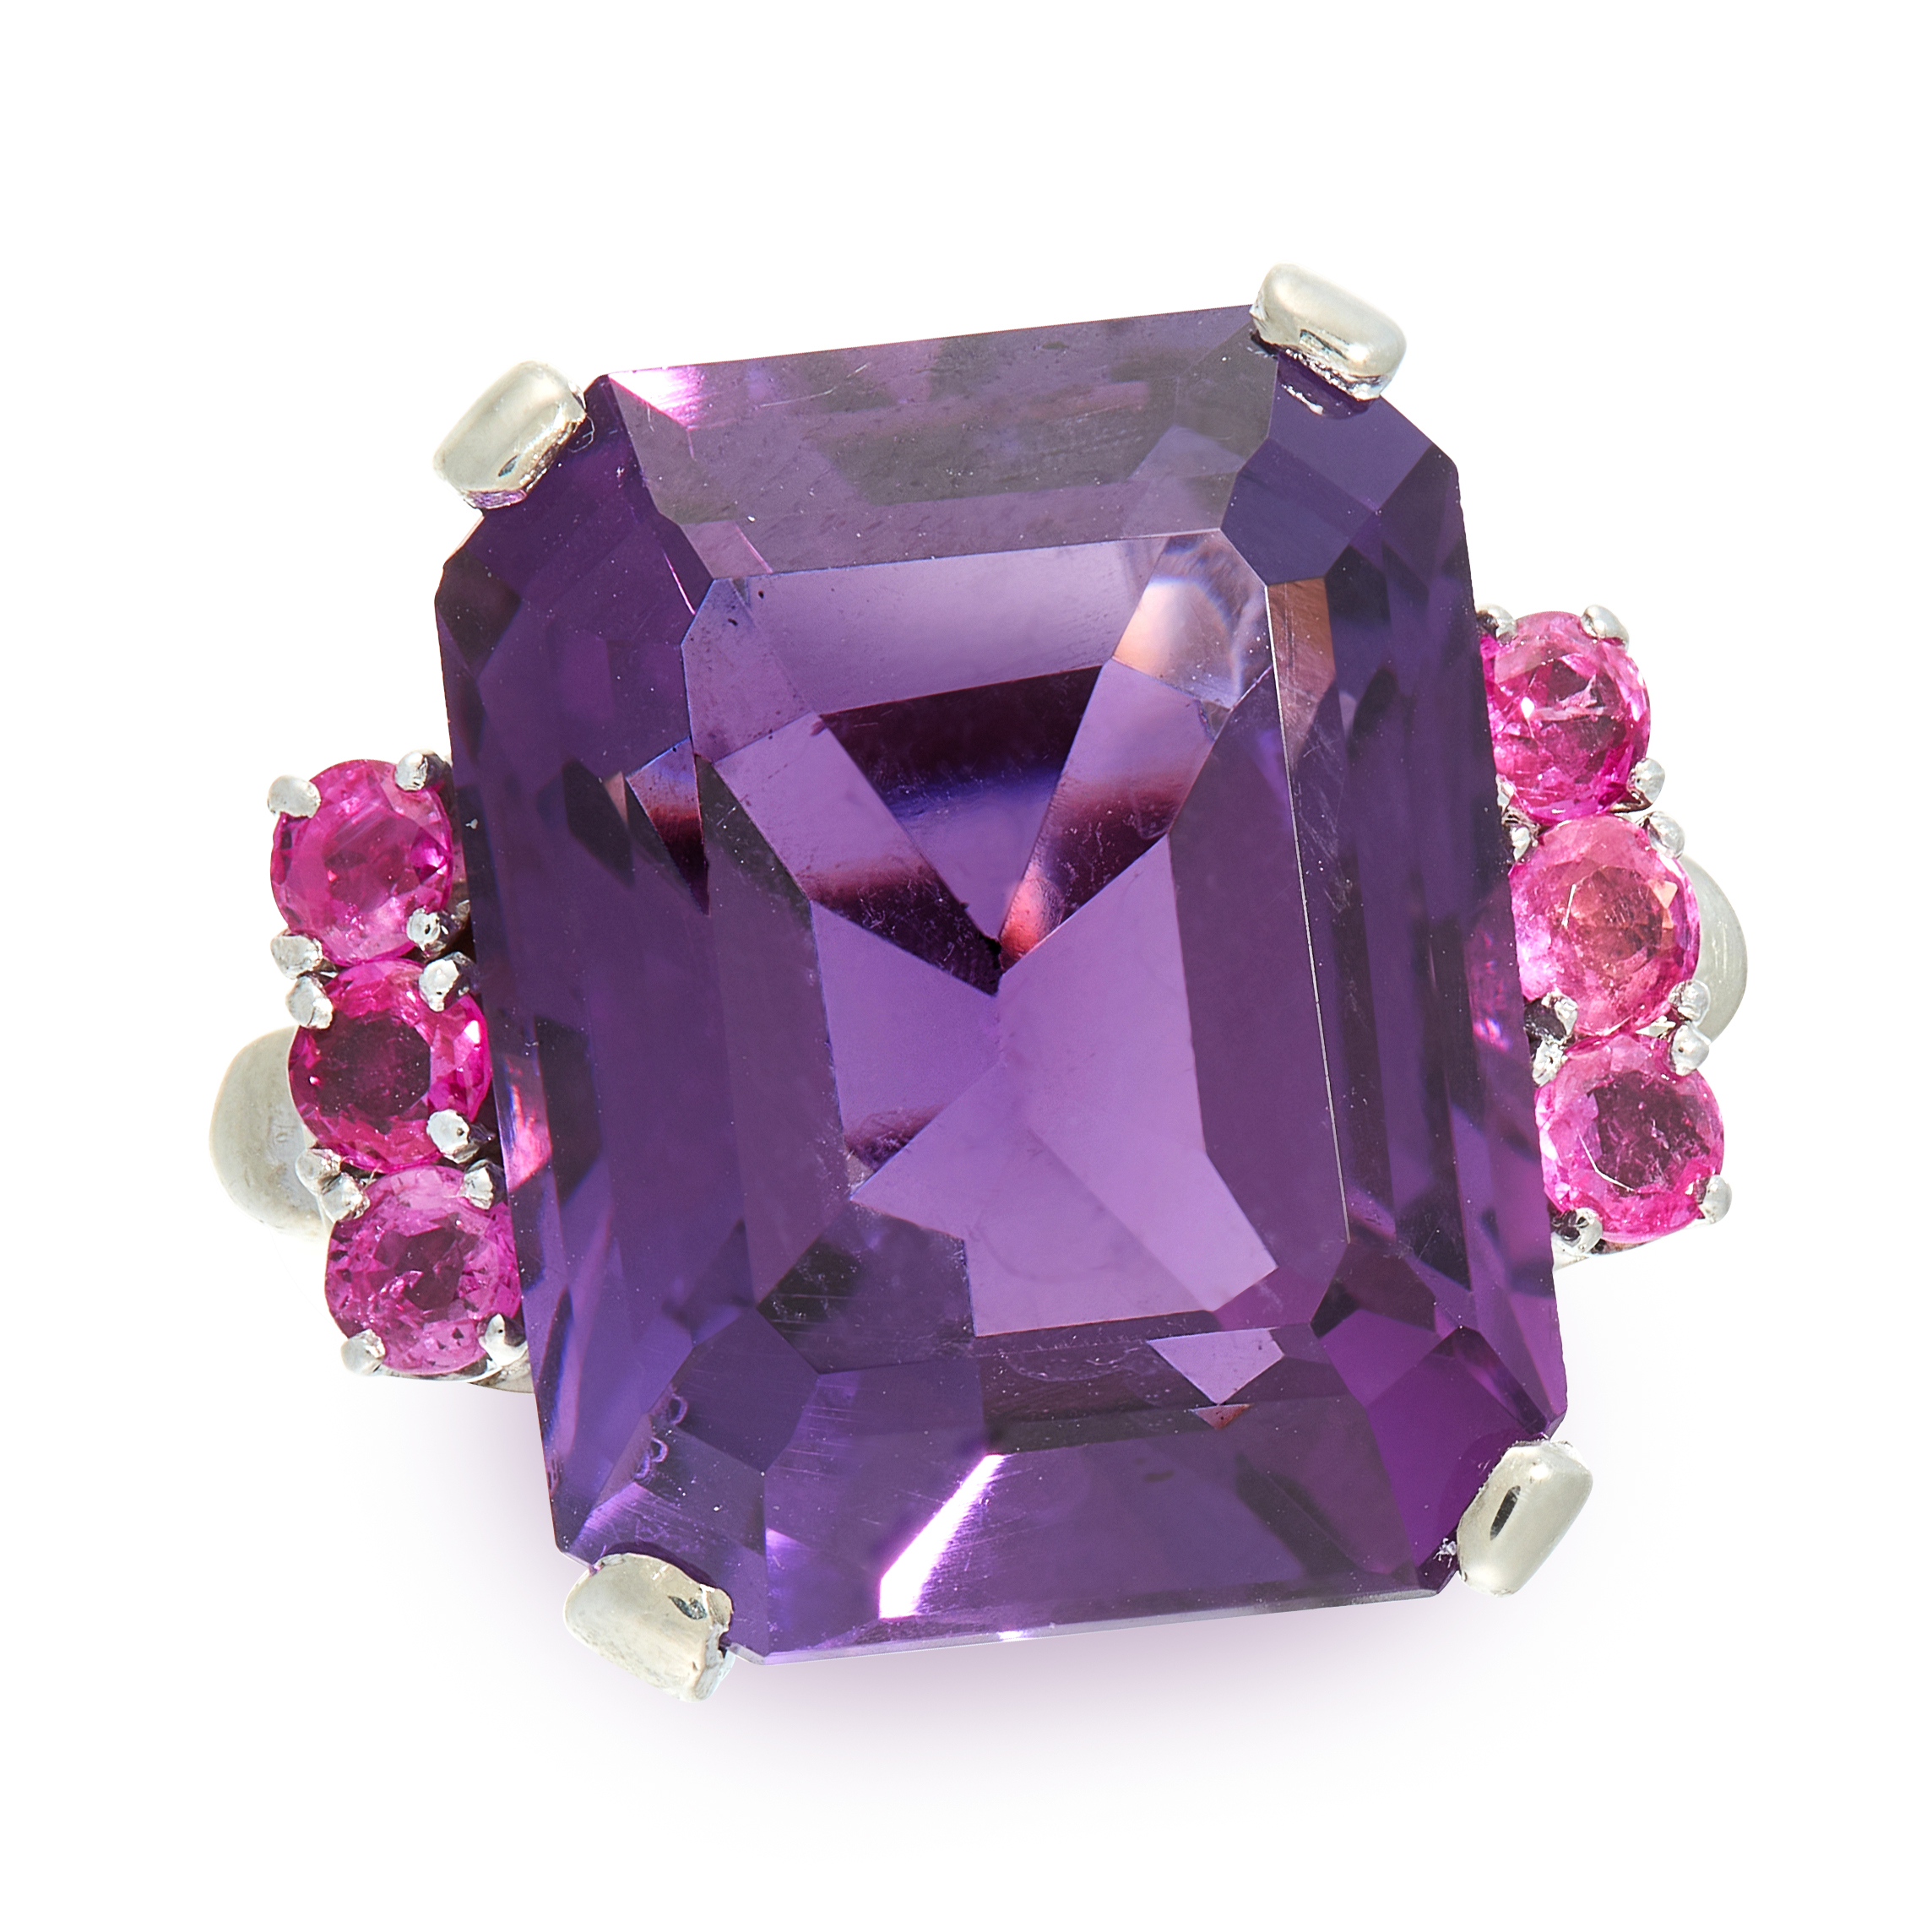 AN AMETHYST AND RUBY COCKTAIL RING in 18ct white gold, set with an emerald cut amethyst of 19.28